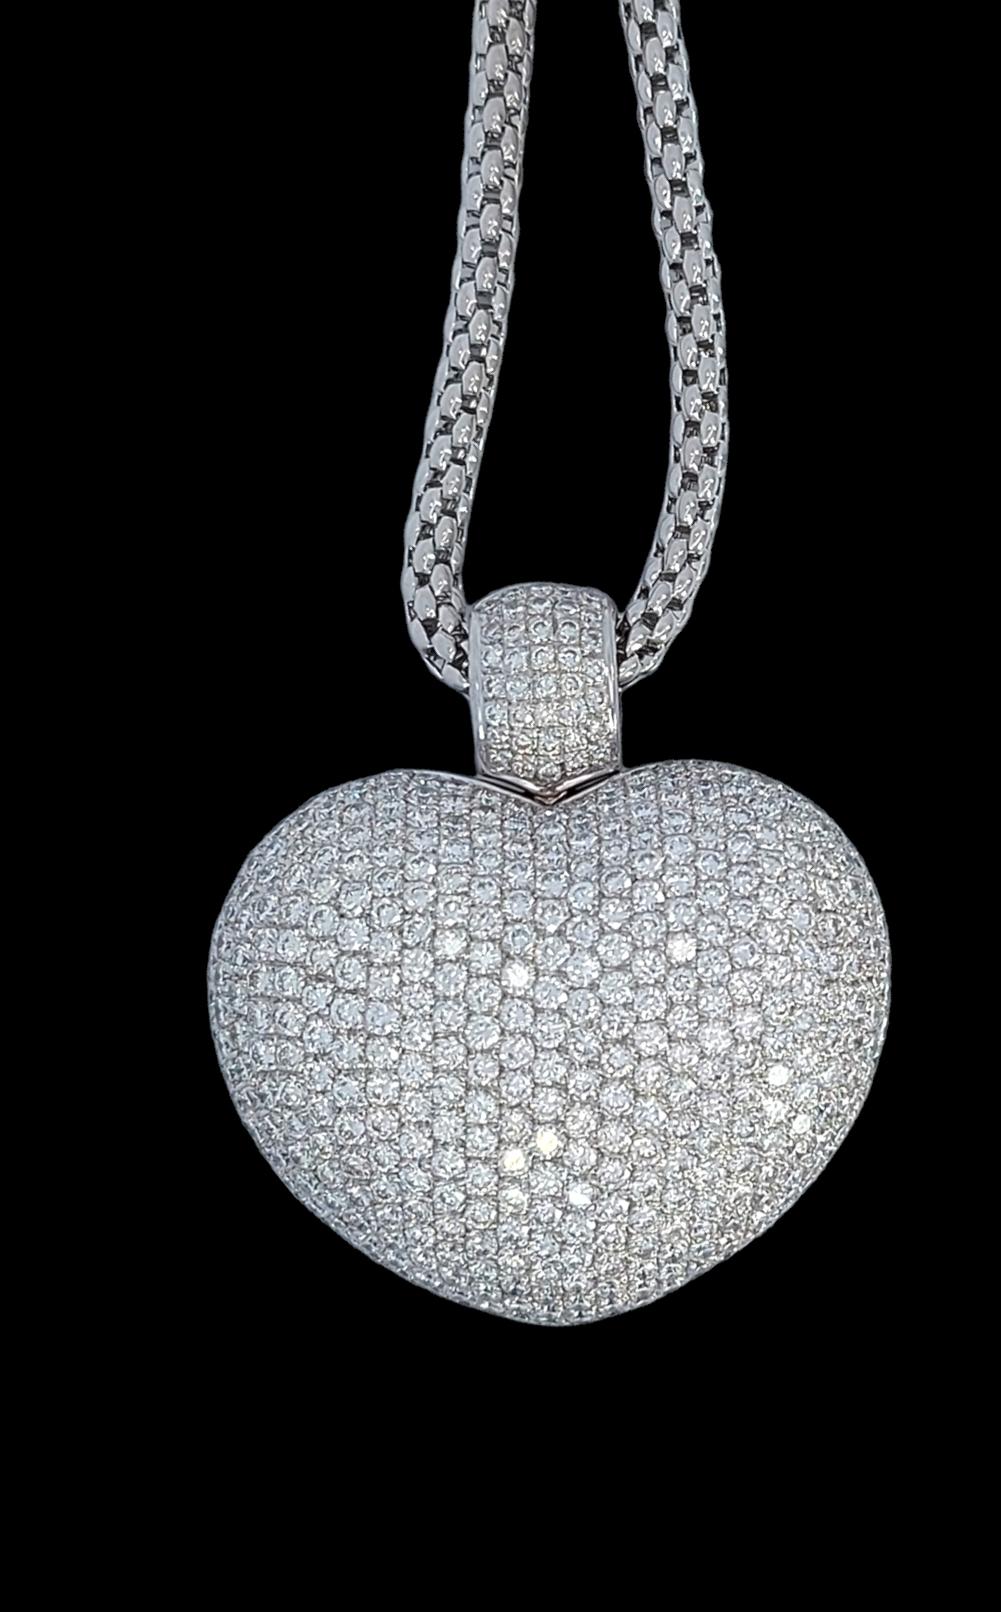 18kt White Gold Heart Pendant With 17 ct. Diamonds With 18kt White Gold Necklace For Sale 2